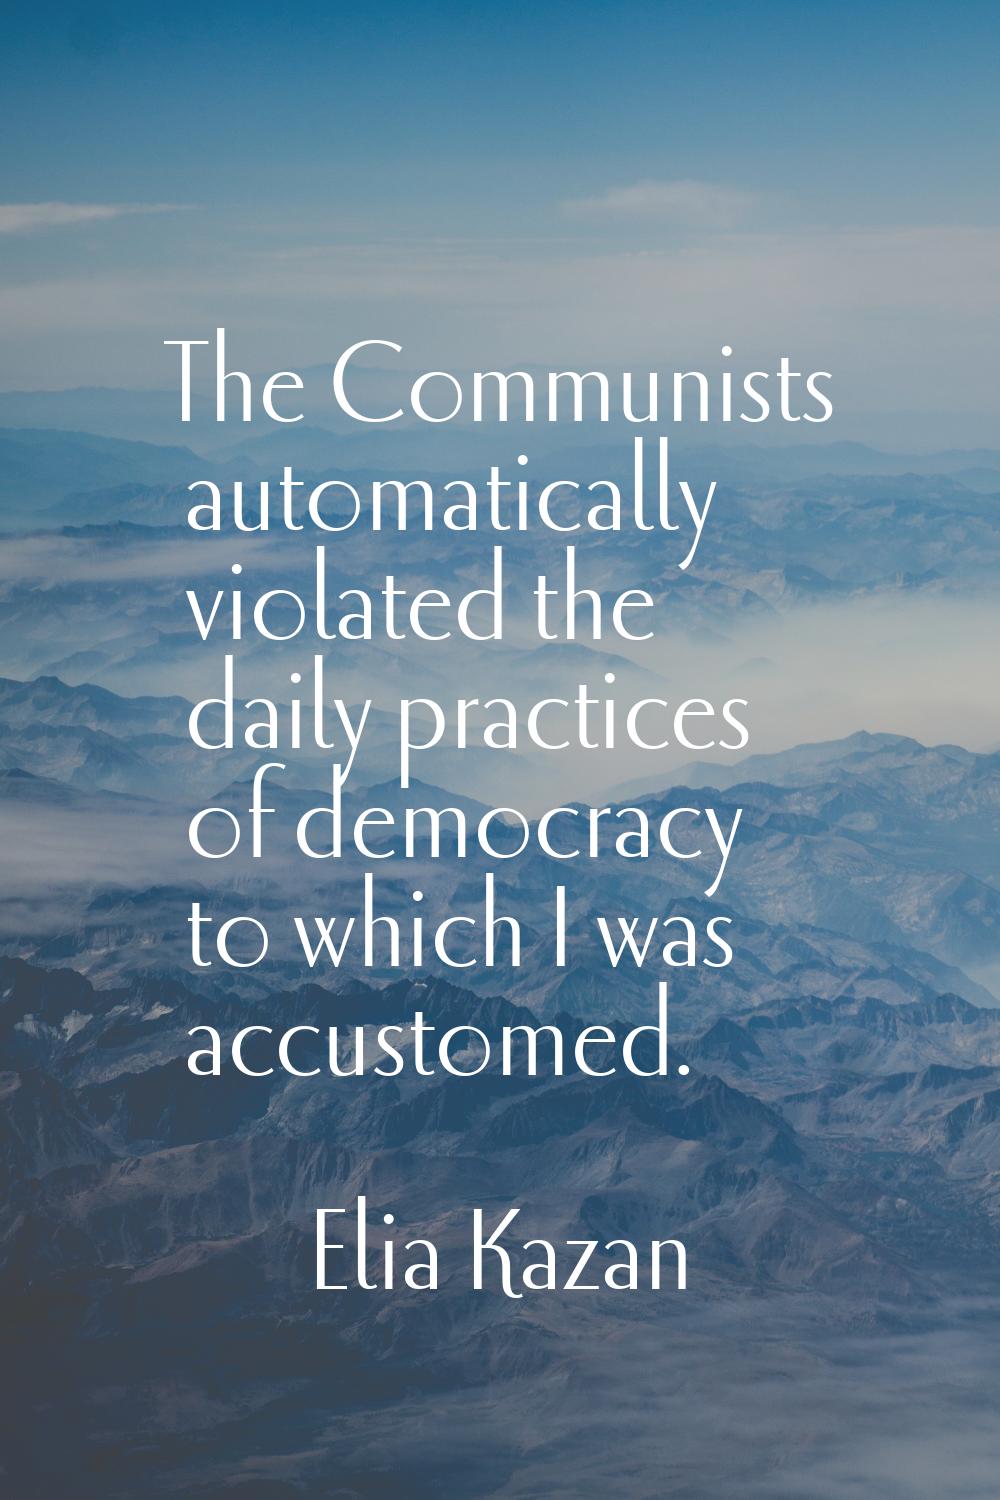 The Communists automatically violated the daily practices of democracy to which I was accustomed.